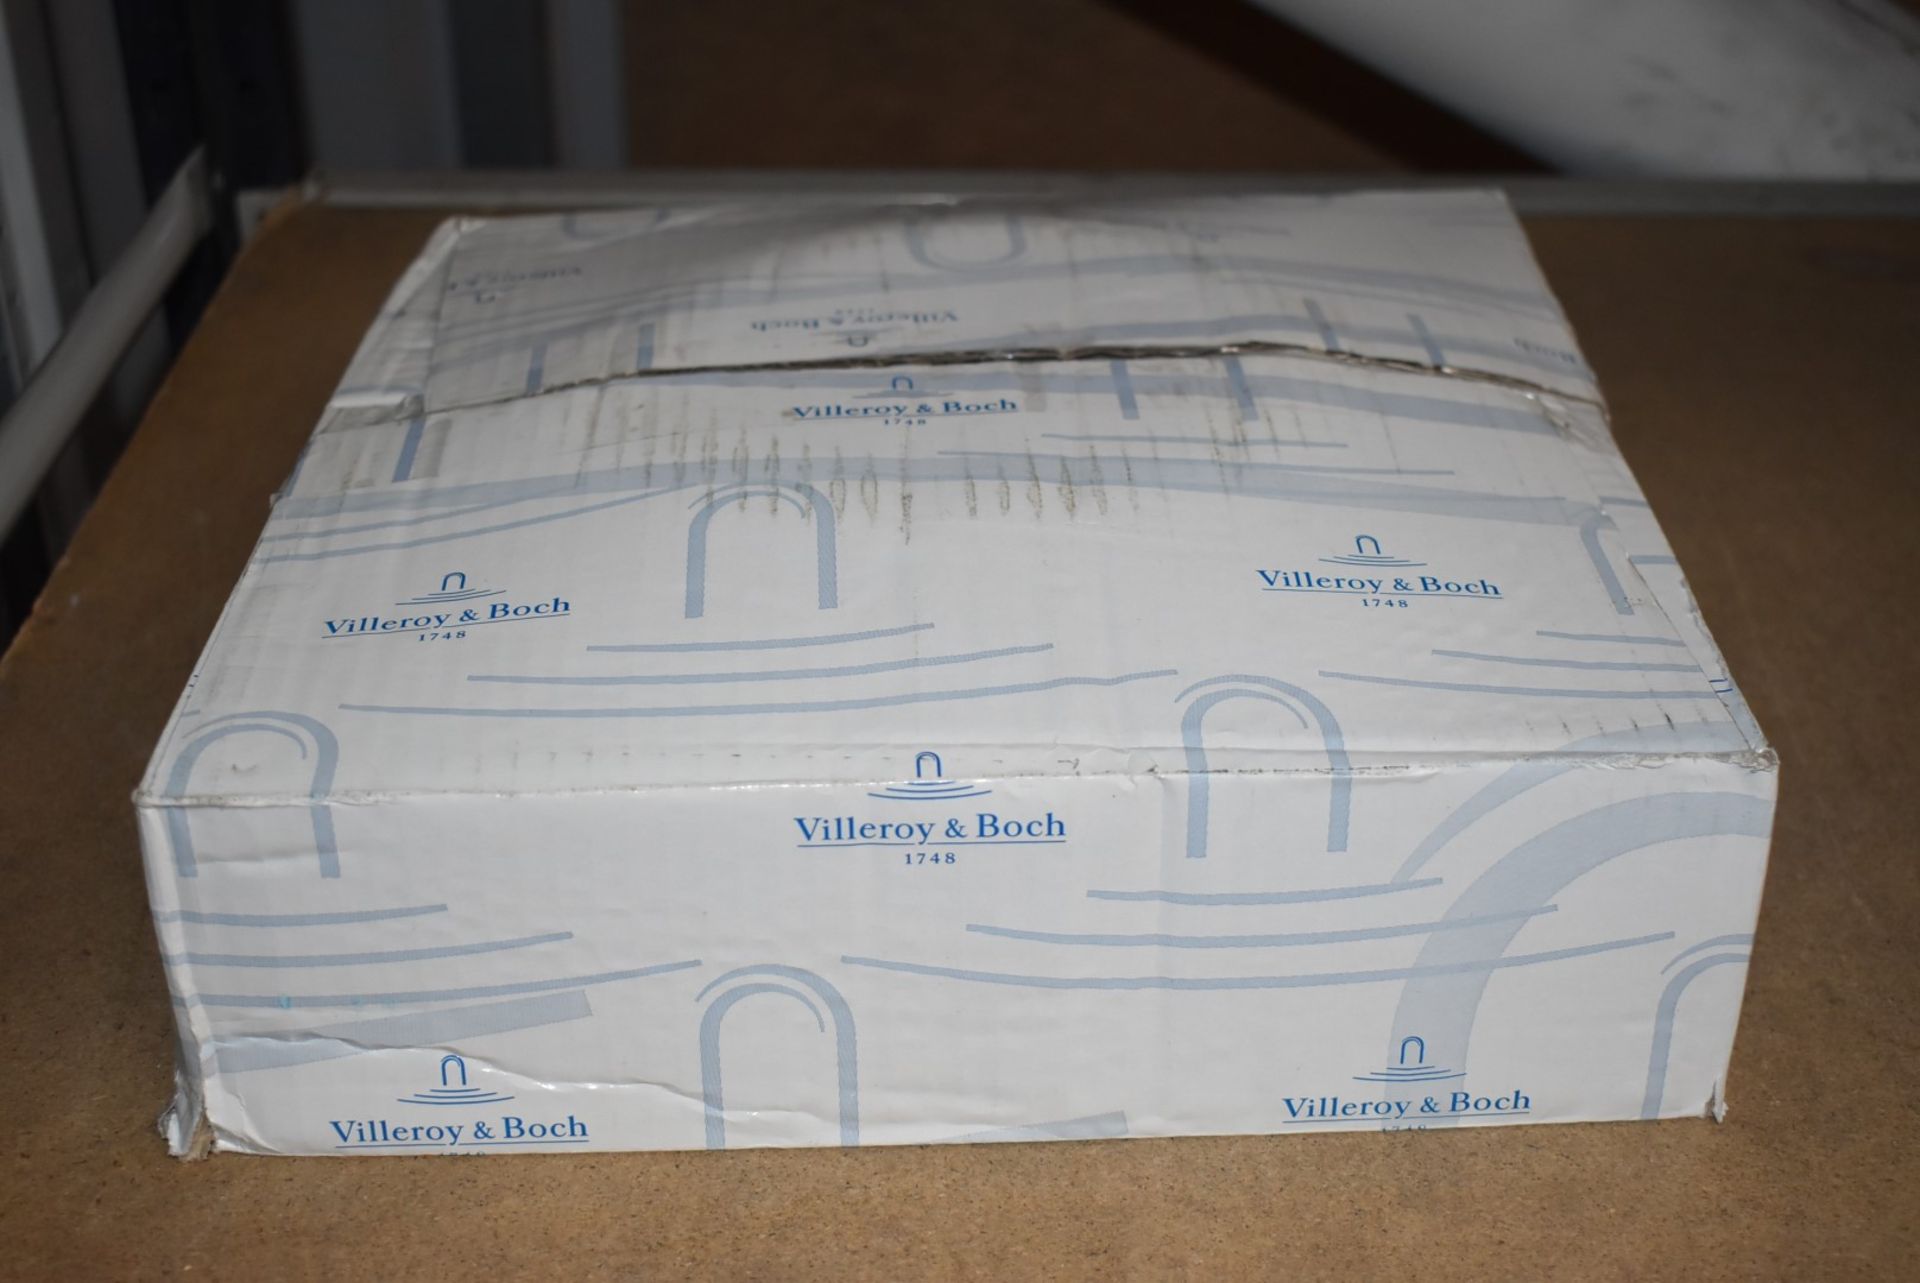 6 x Villeroy & Boch Affinity Contemporary Porcelain Flat Dinner Plates - 27 cms - New Boxed - Image 3 of 5